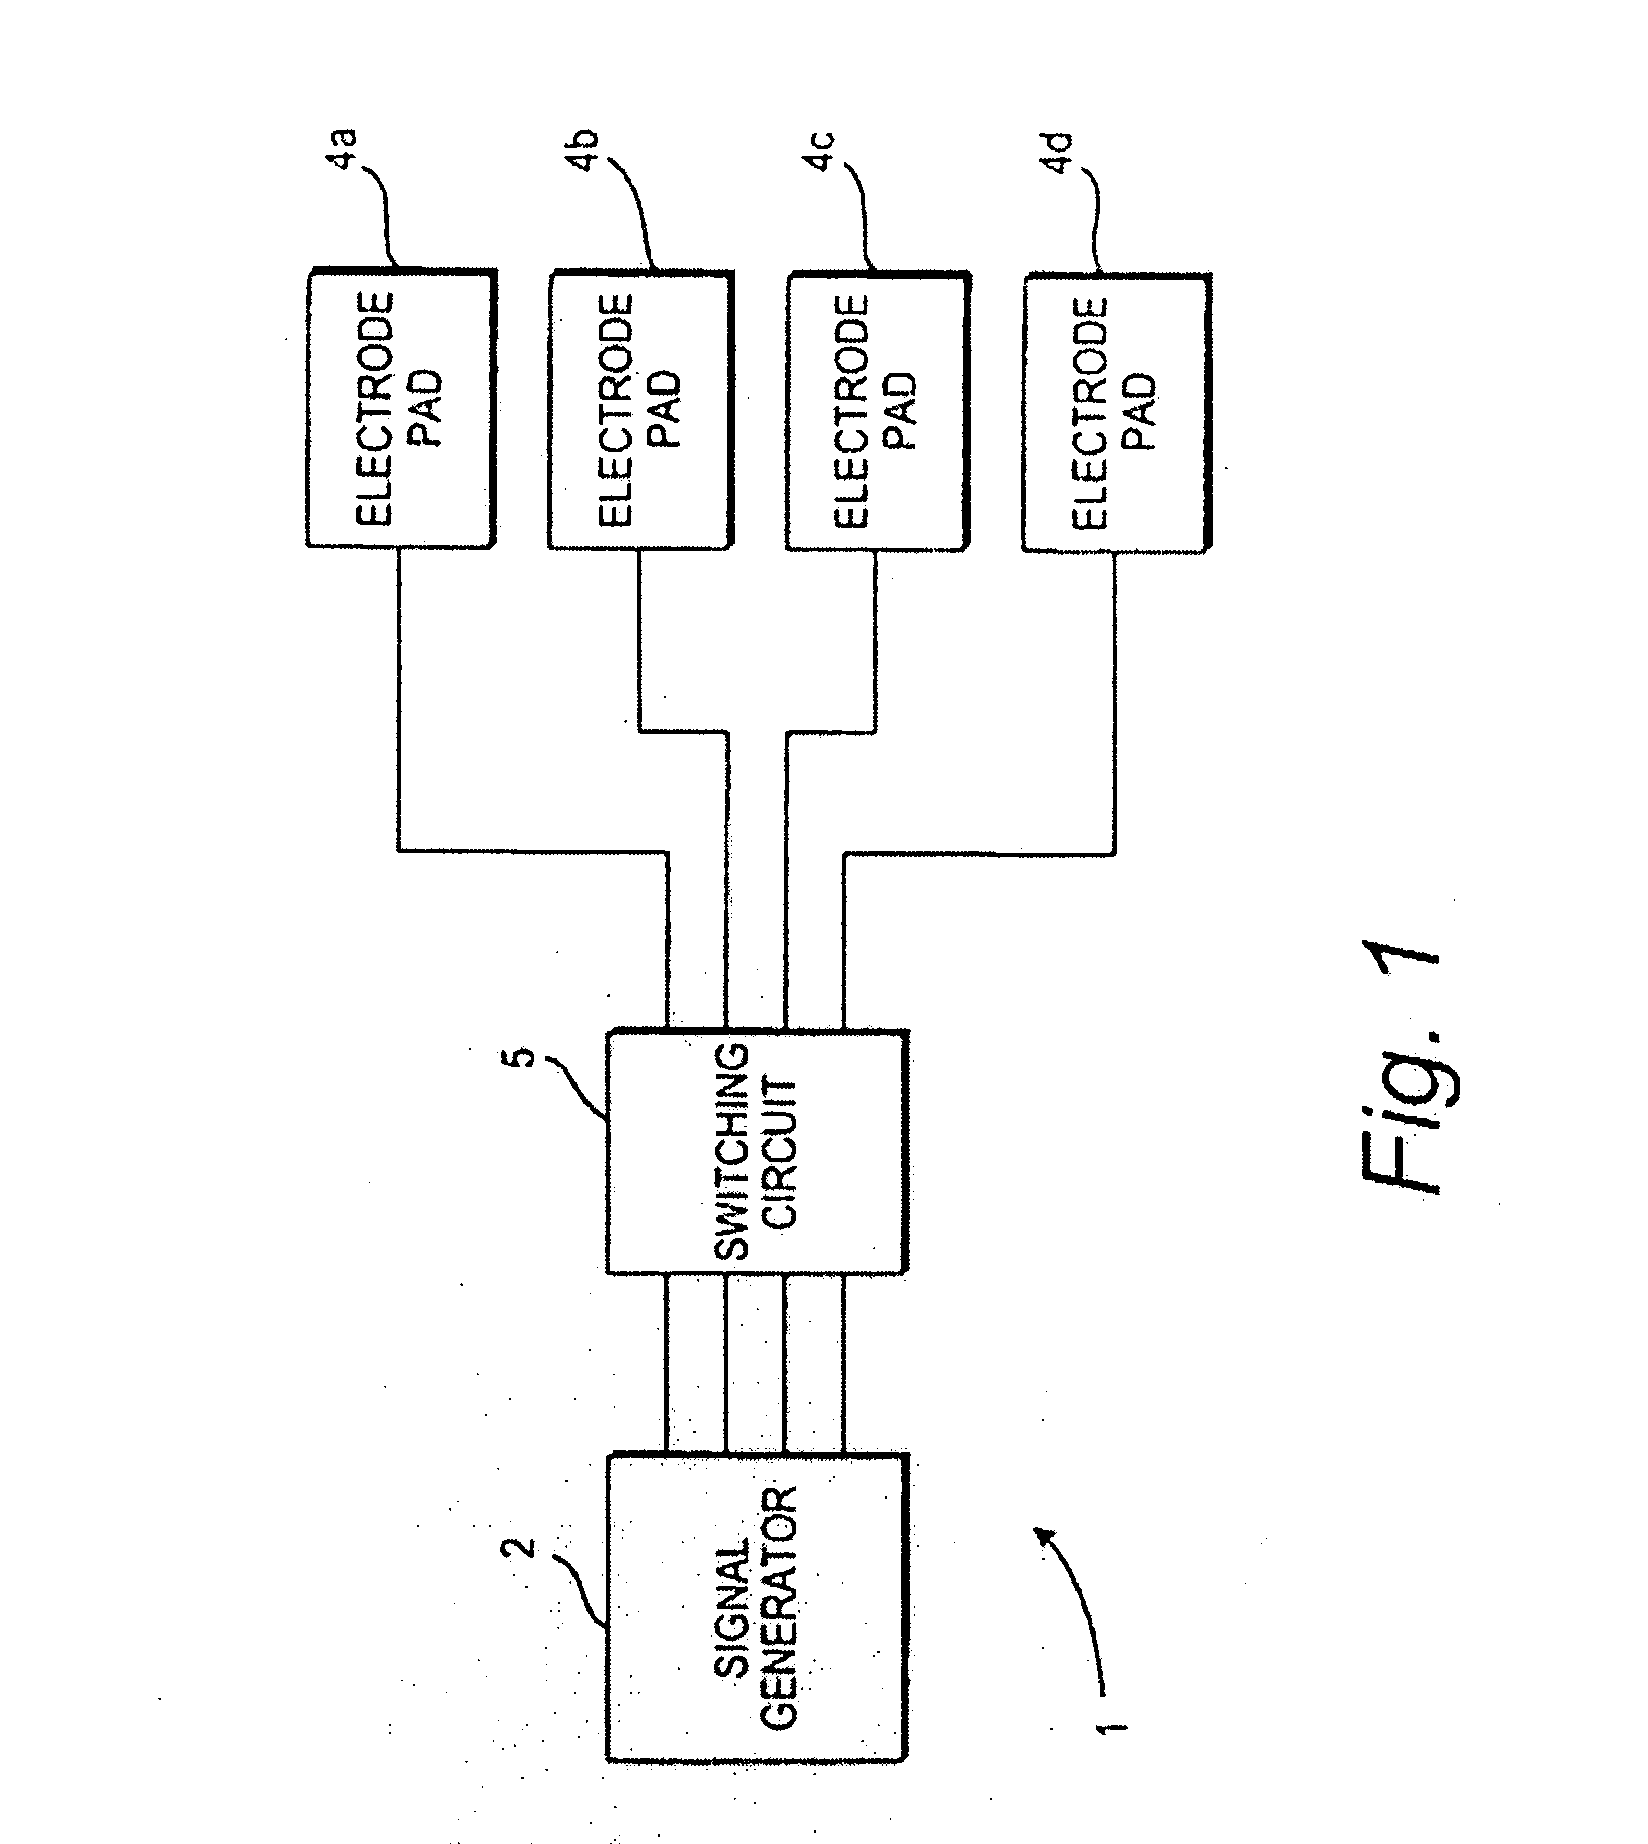 Apparatus for stimulating a muscle of a subject